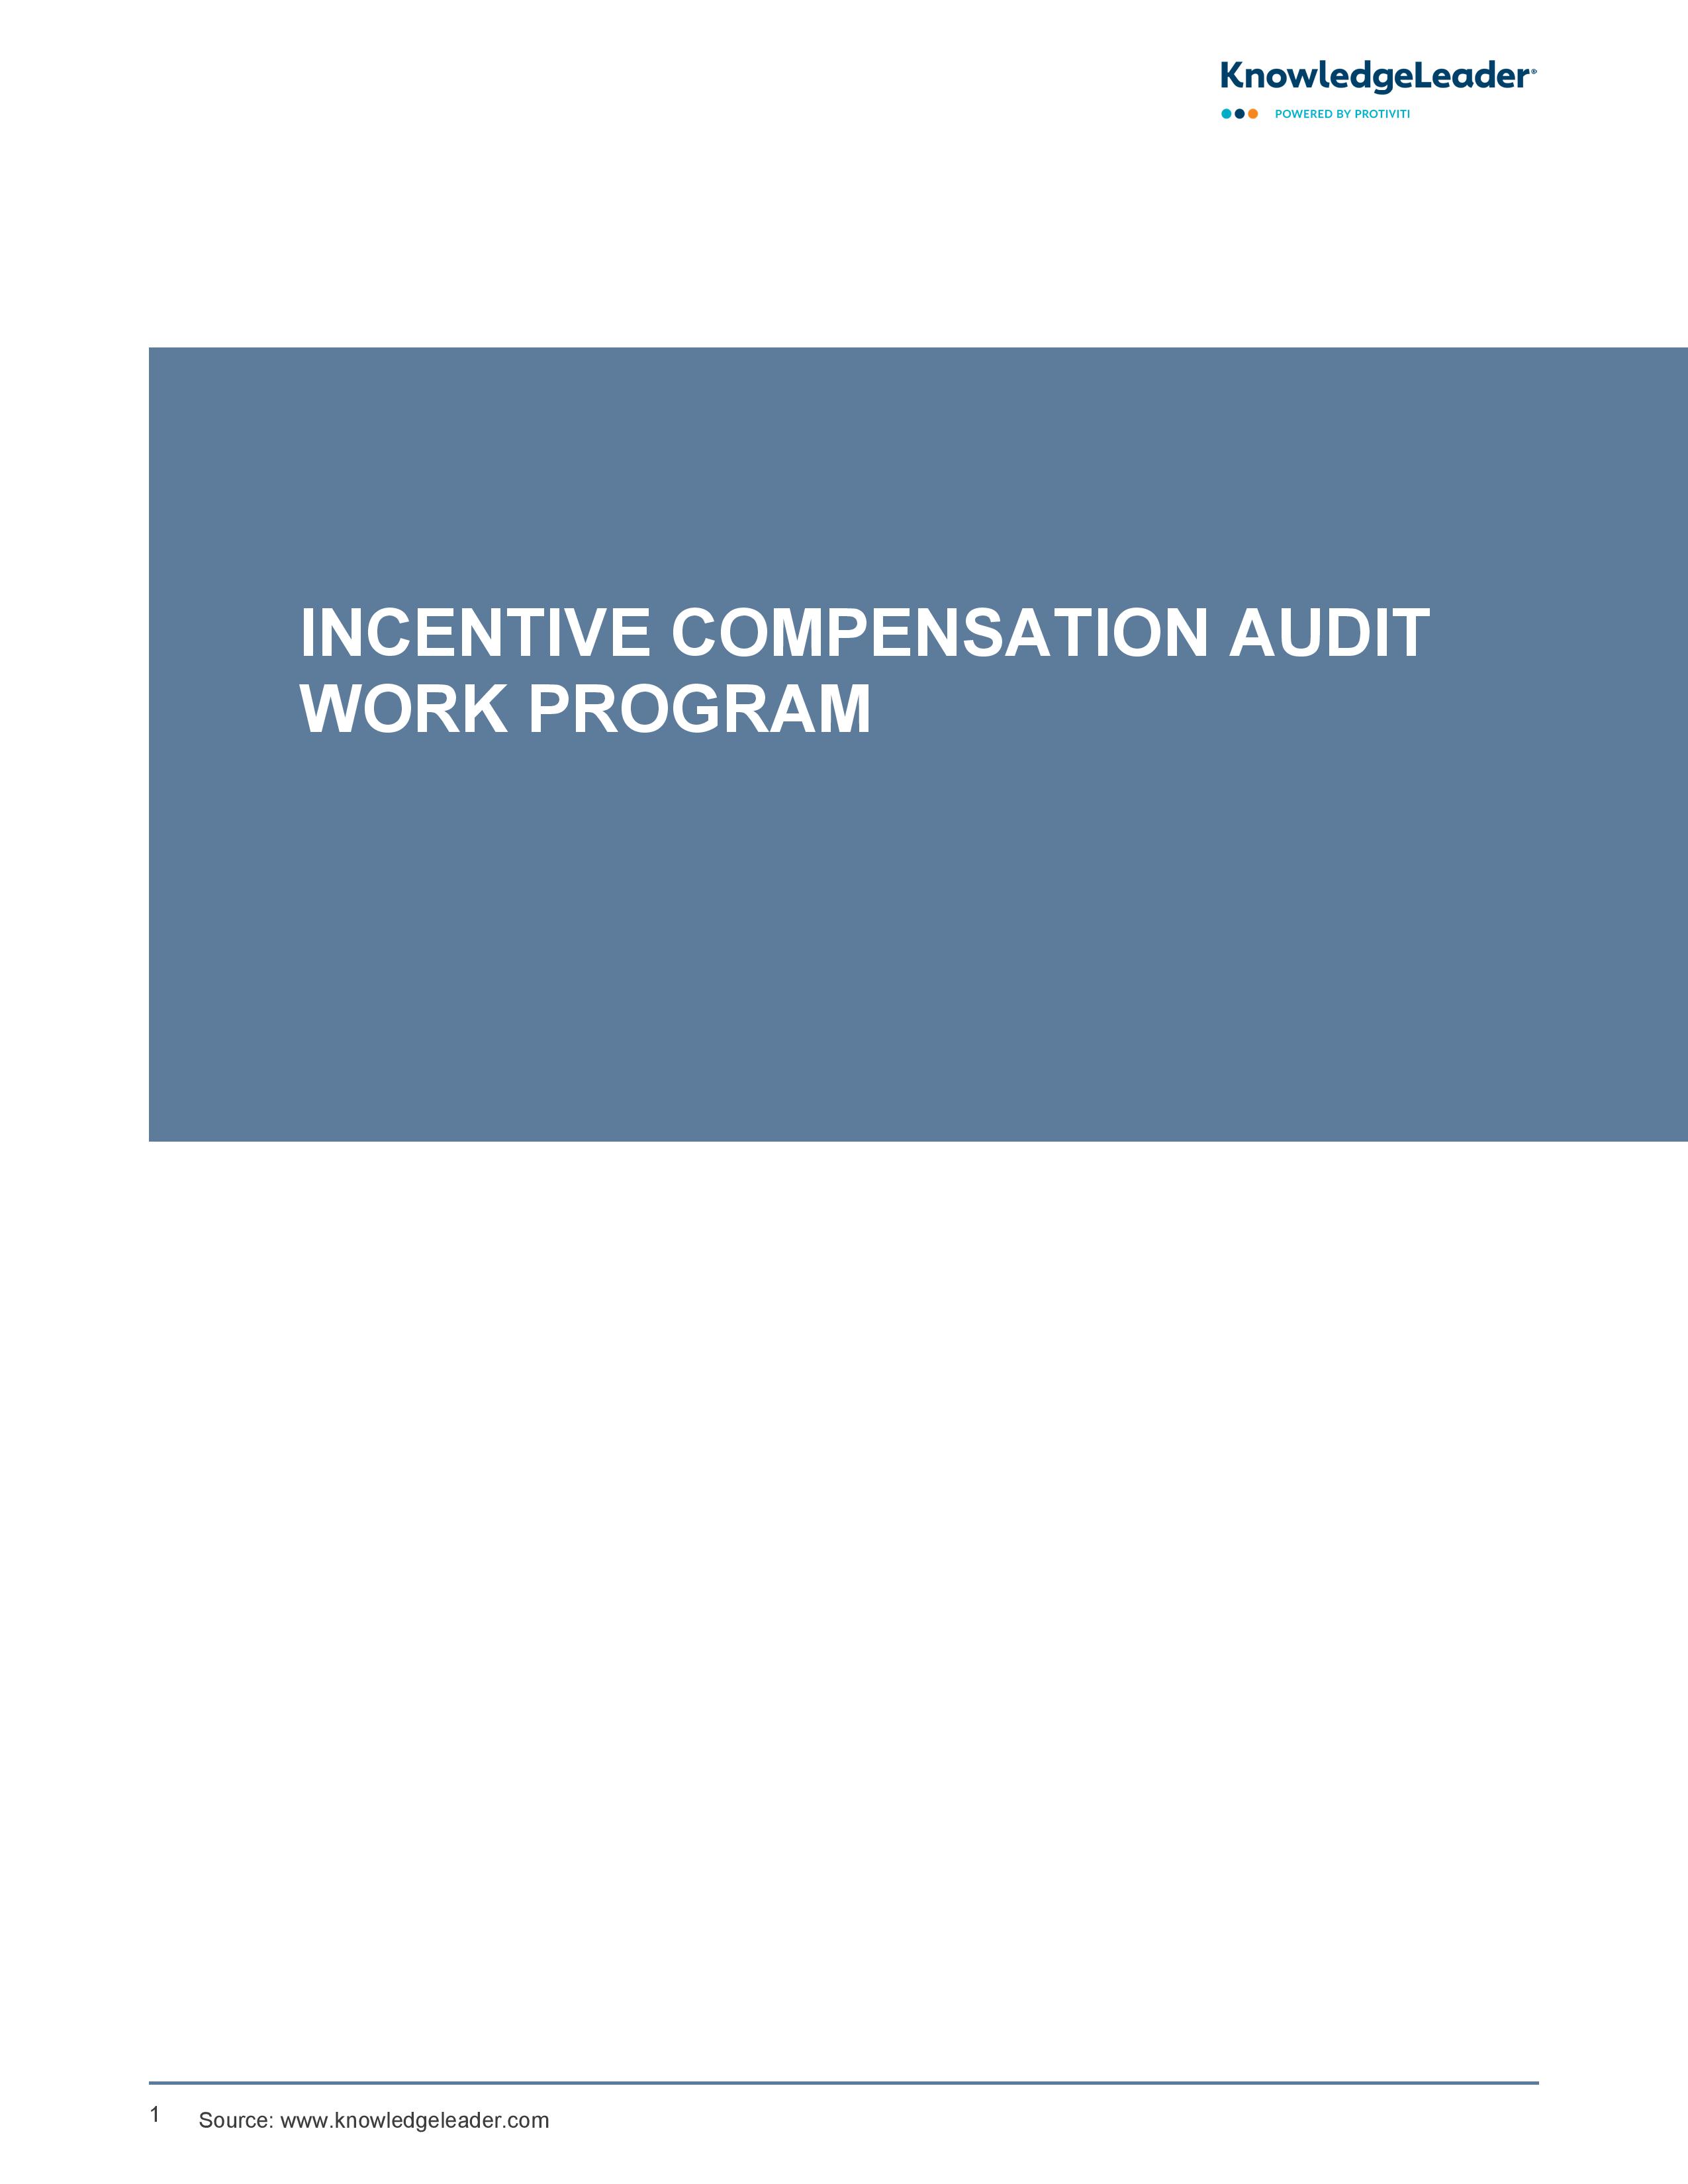 screenshot of the first page of Incentive Compensation Audit Work Program